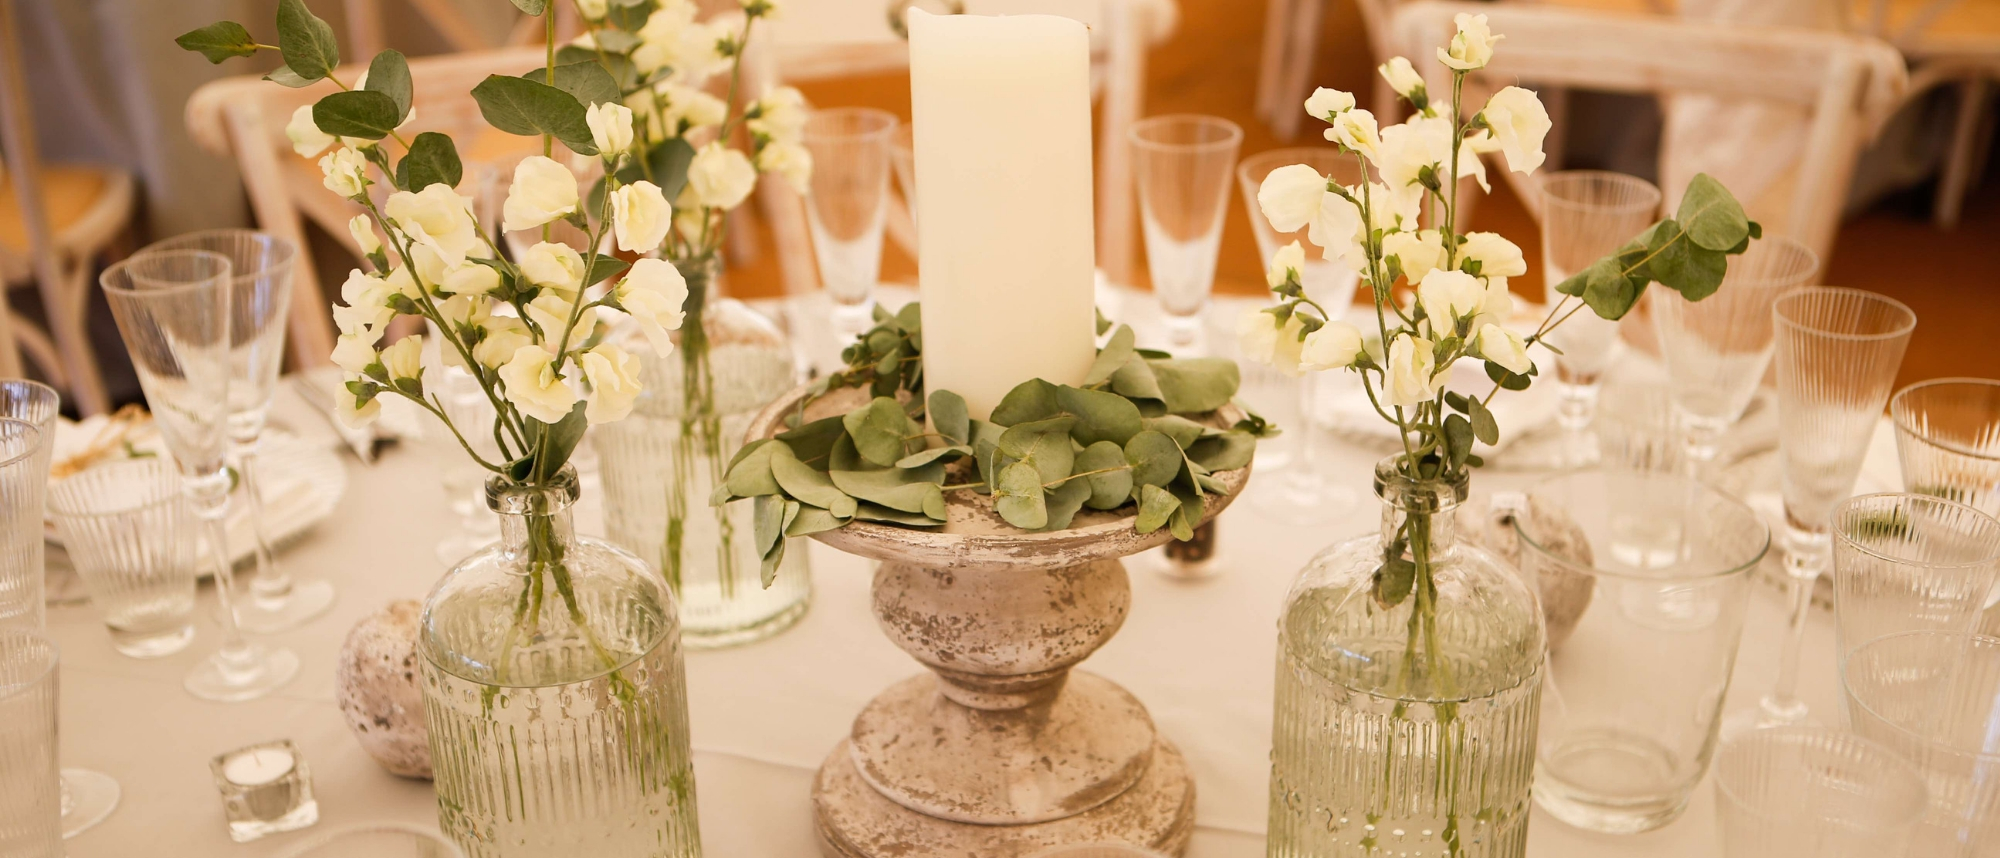 Wedding table decor with candles and glassware